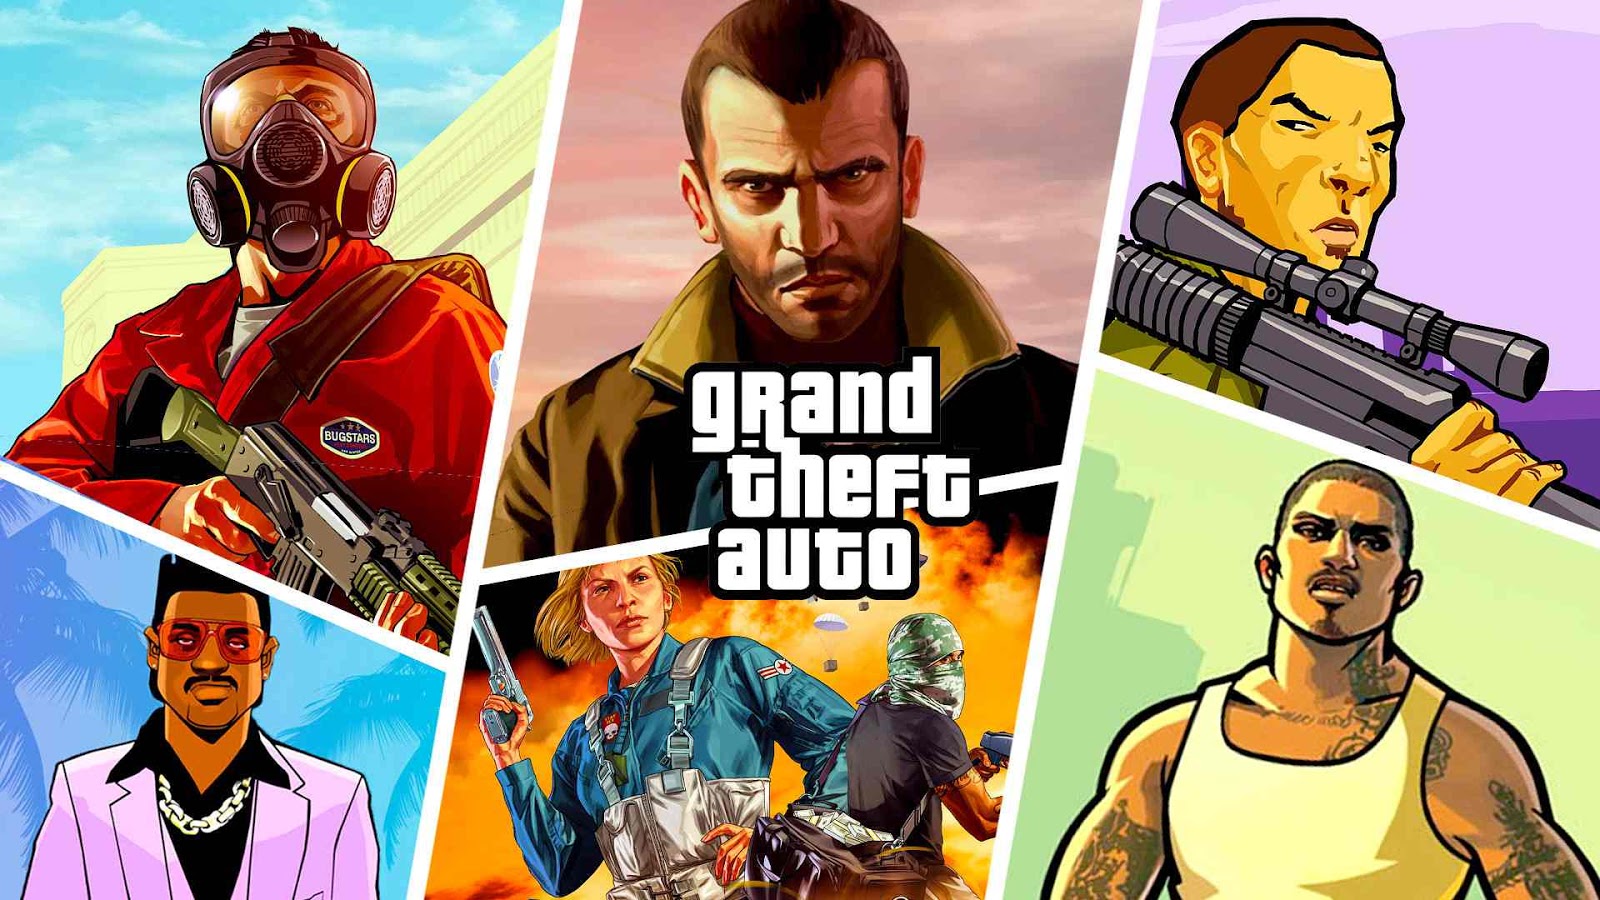 Gta Grand Theft Auto All Games Pc Full Version Free Download